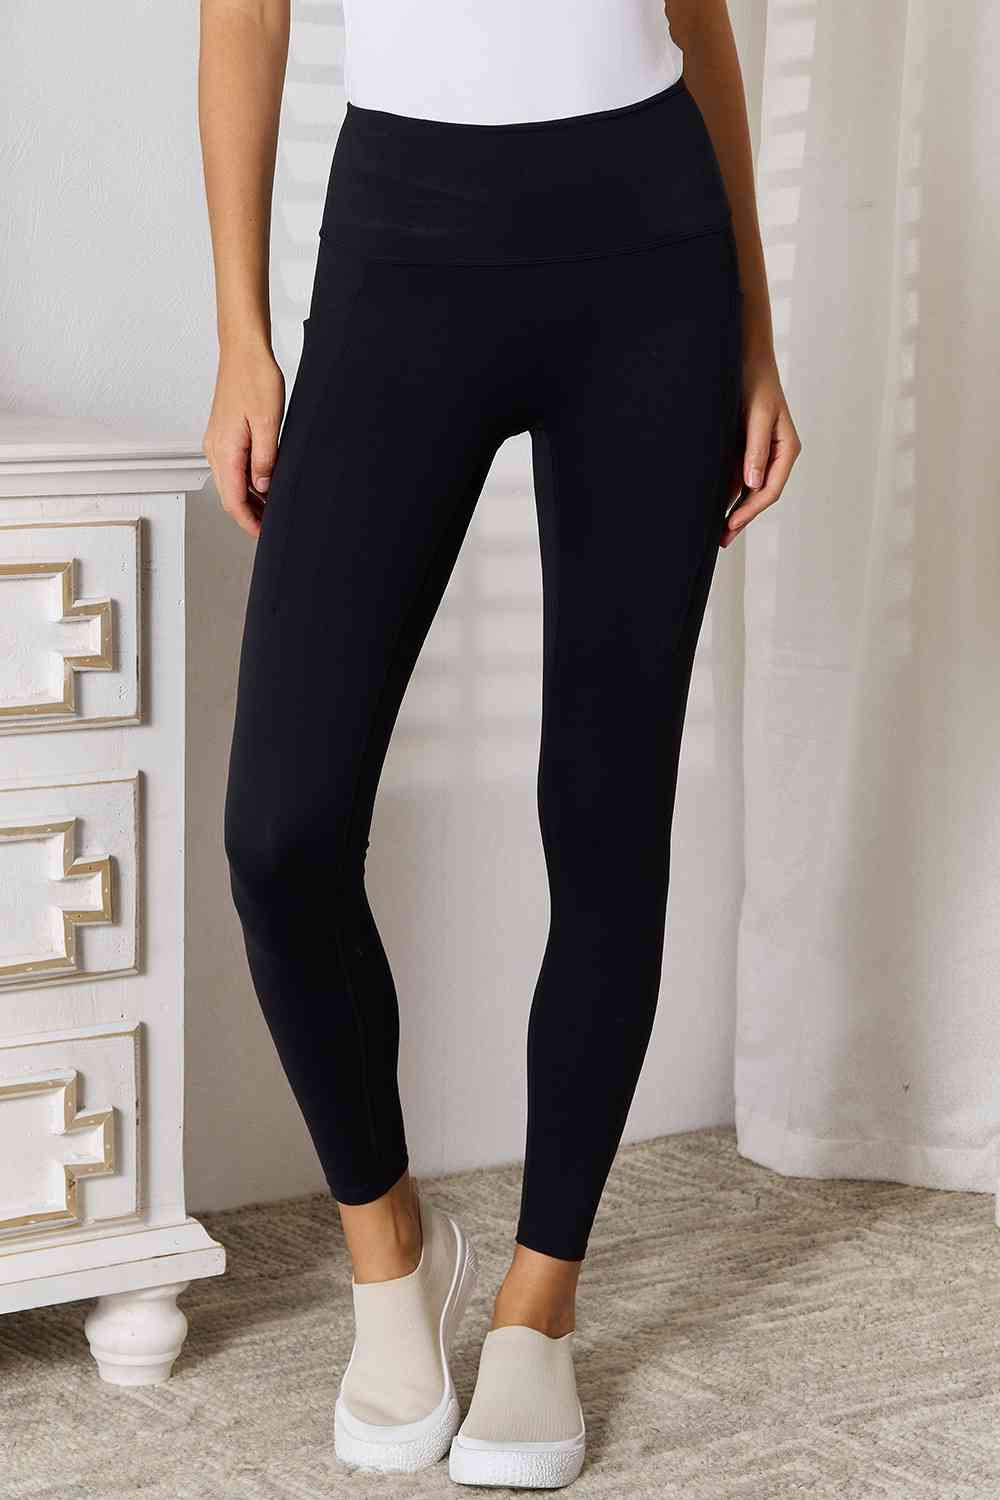 Stop what you're doing!! Aerie Women's Leggings are on SALE! As